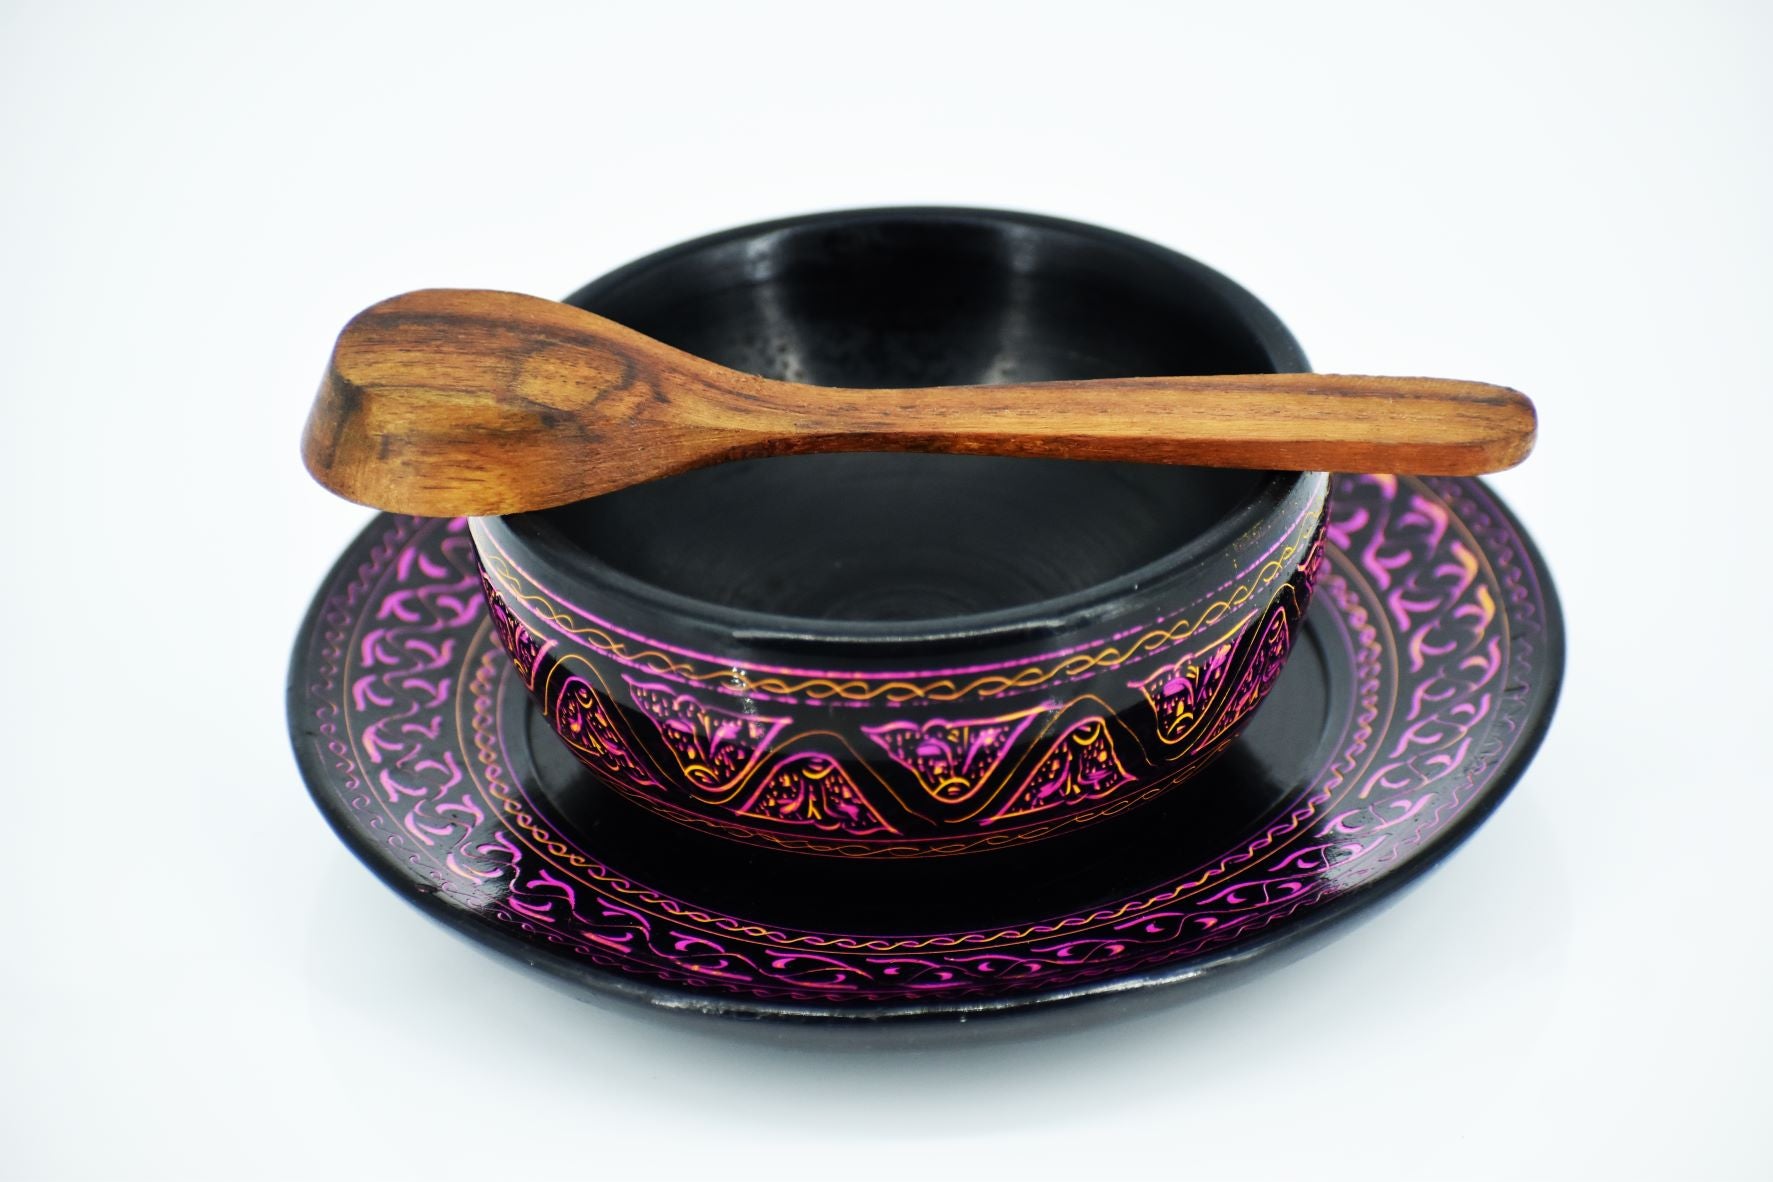 Lacquer Art Soup Bowl with Spoon and Plate I Lacquer art Craft Decorative Accent I handpainted handcrafted I Sheesham Wood ( RoseWood) I Pakistani Artisan Design